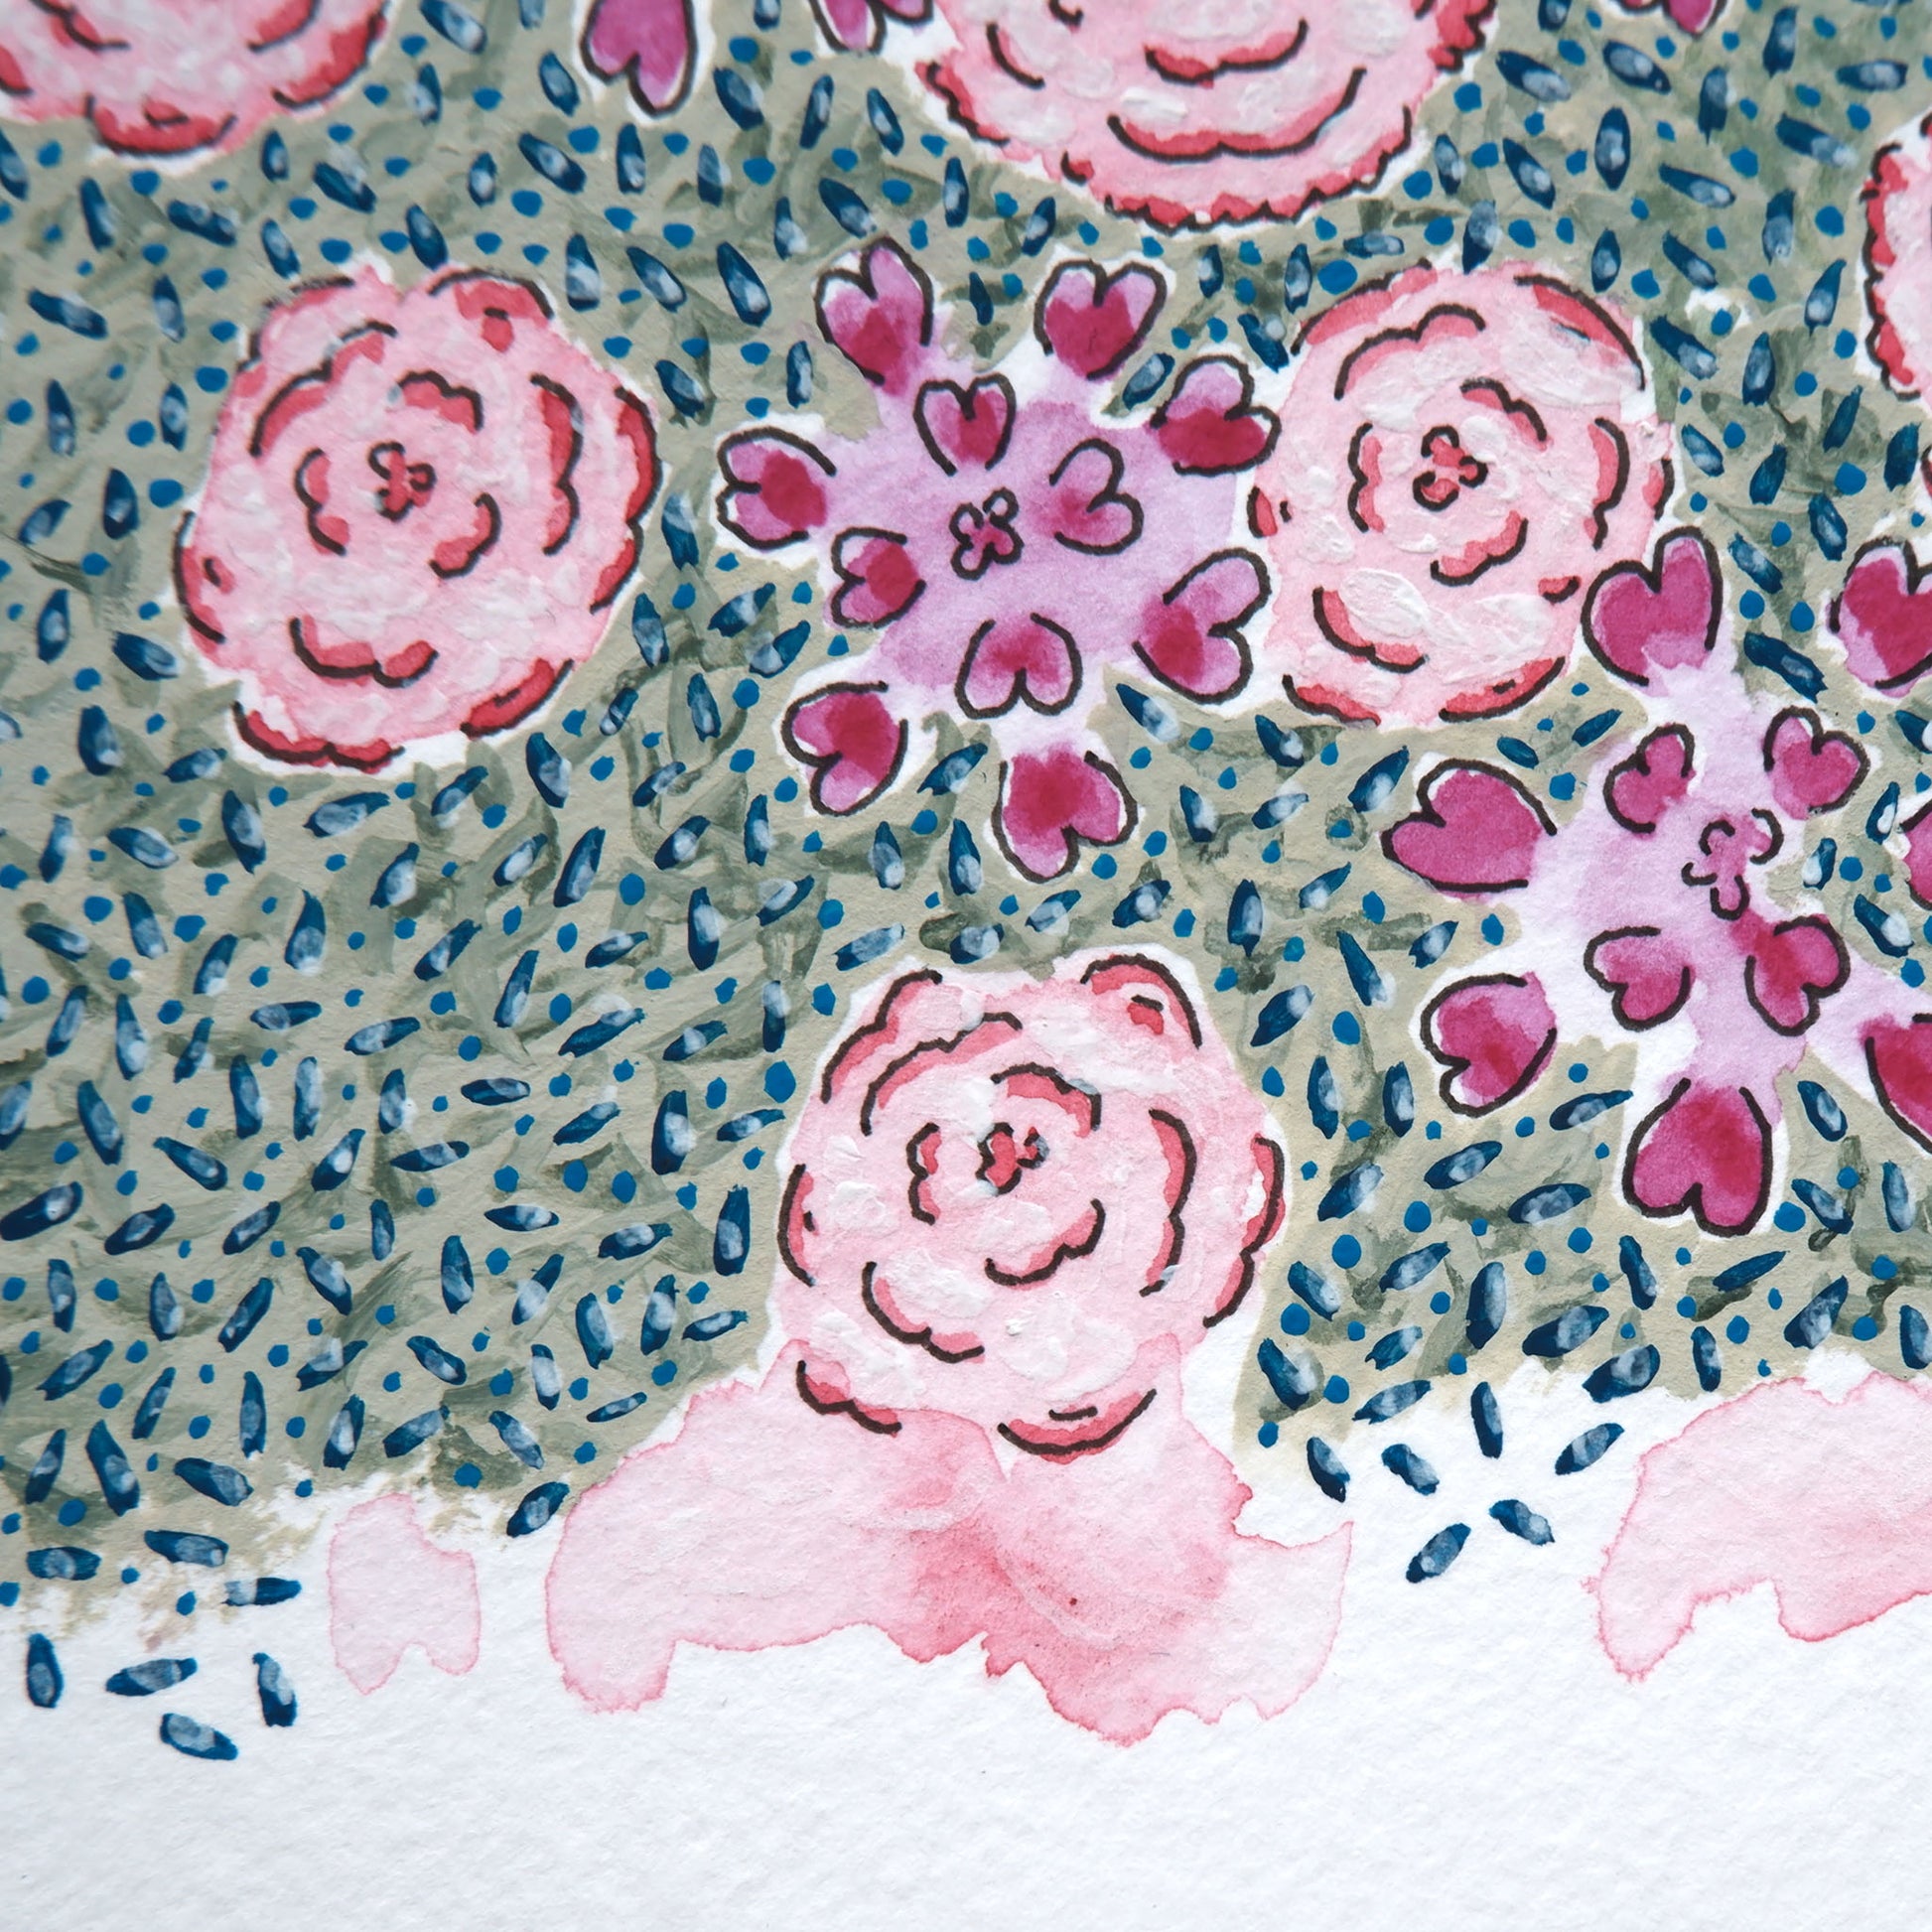 Close-up of Floral Eternal original watercolour painting shows sage green background speckled with dark green-blue impressions of leaves and pink heart petal details.